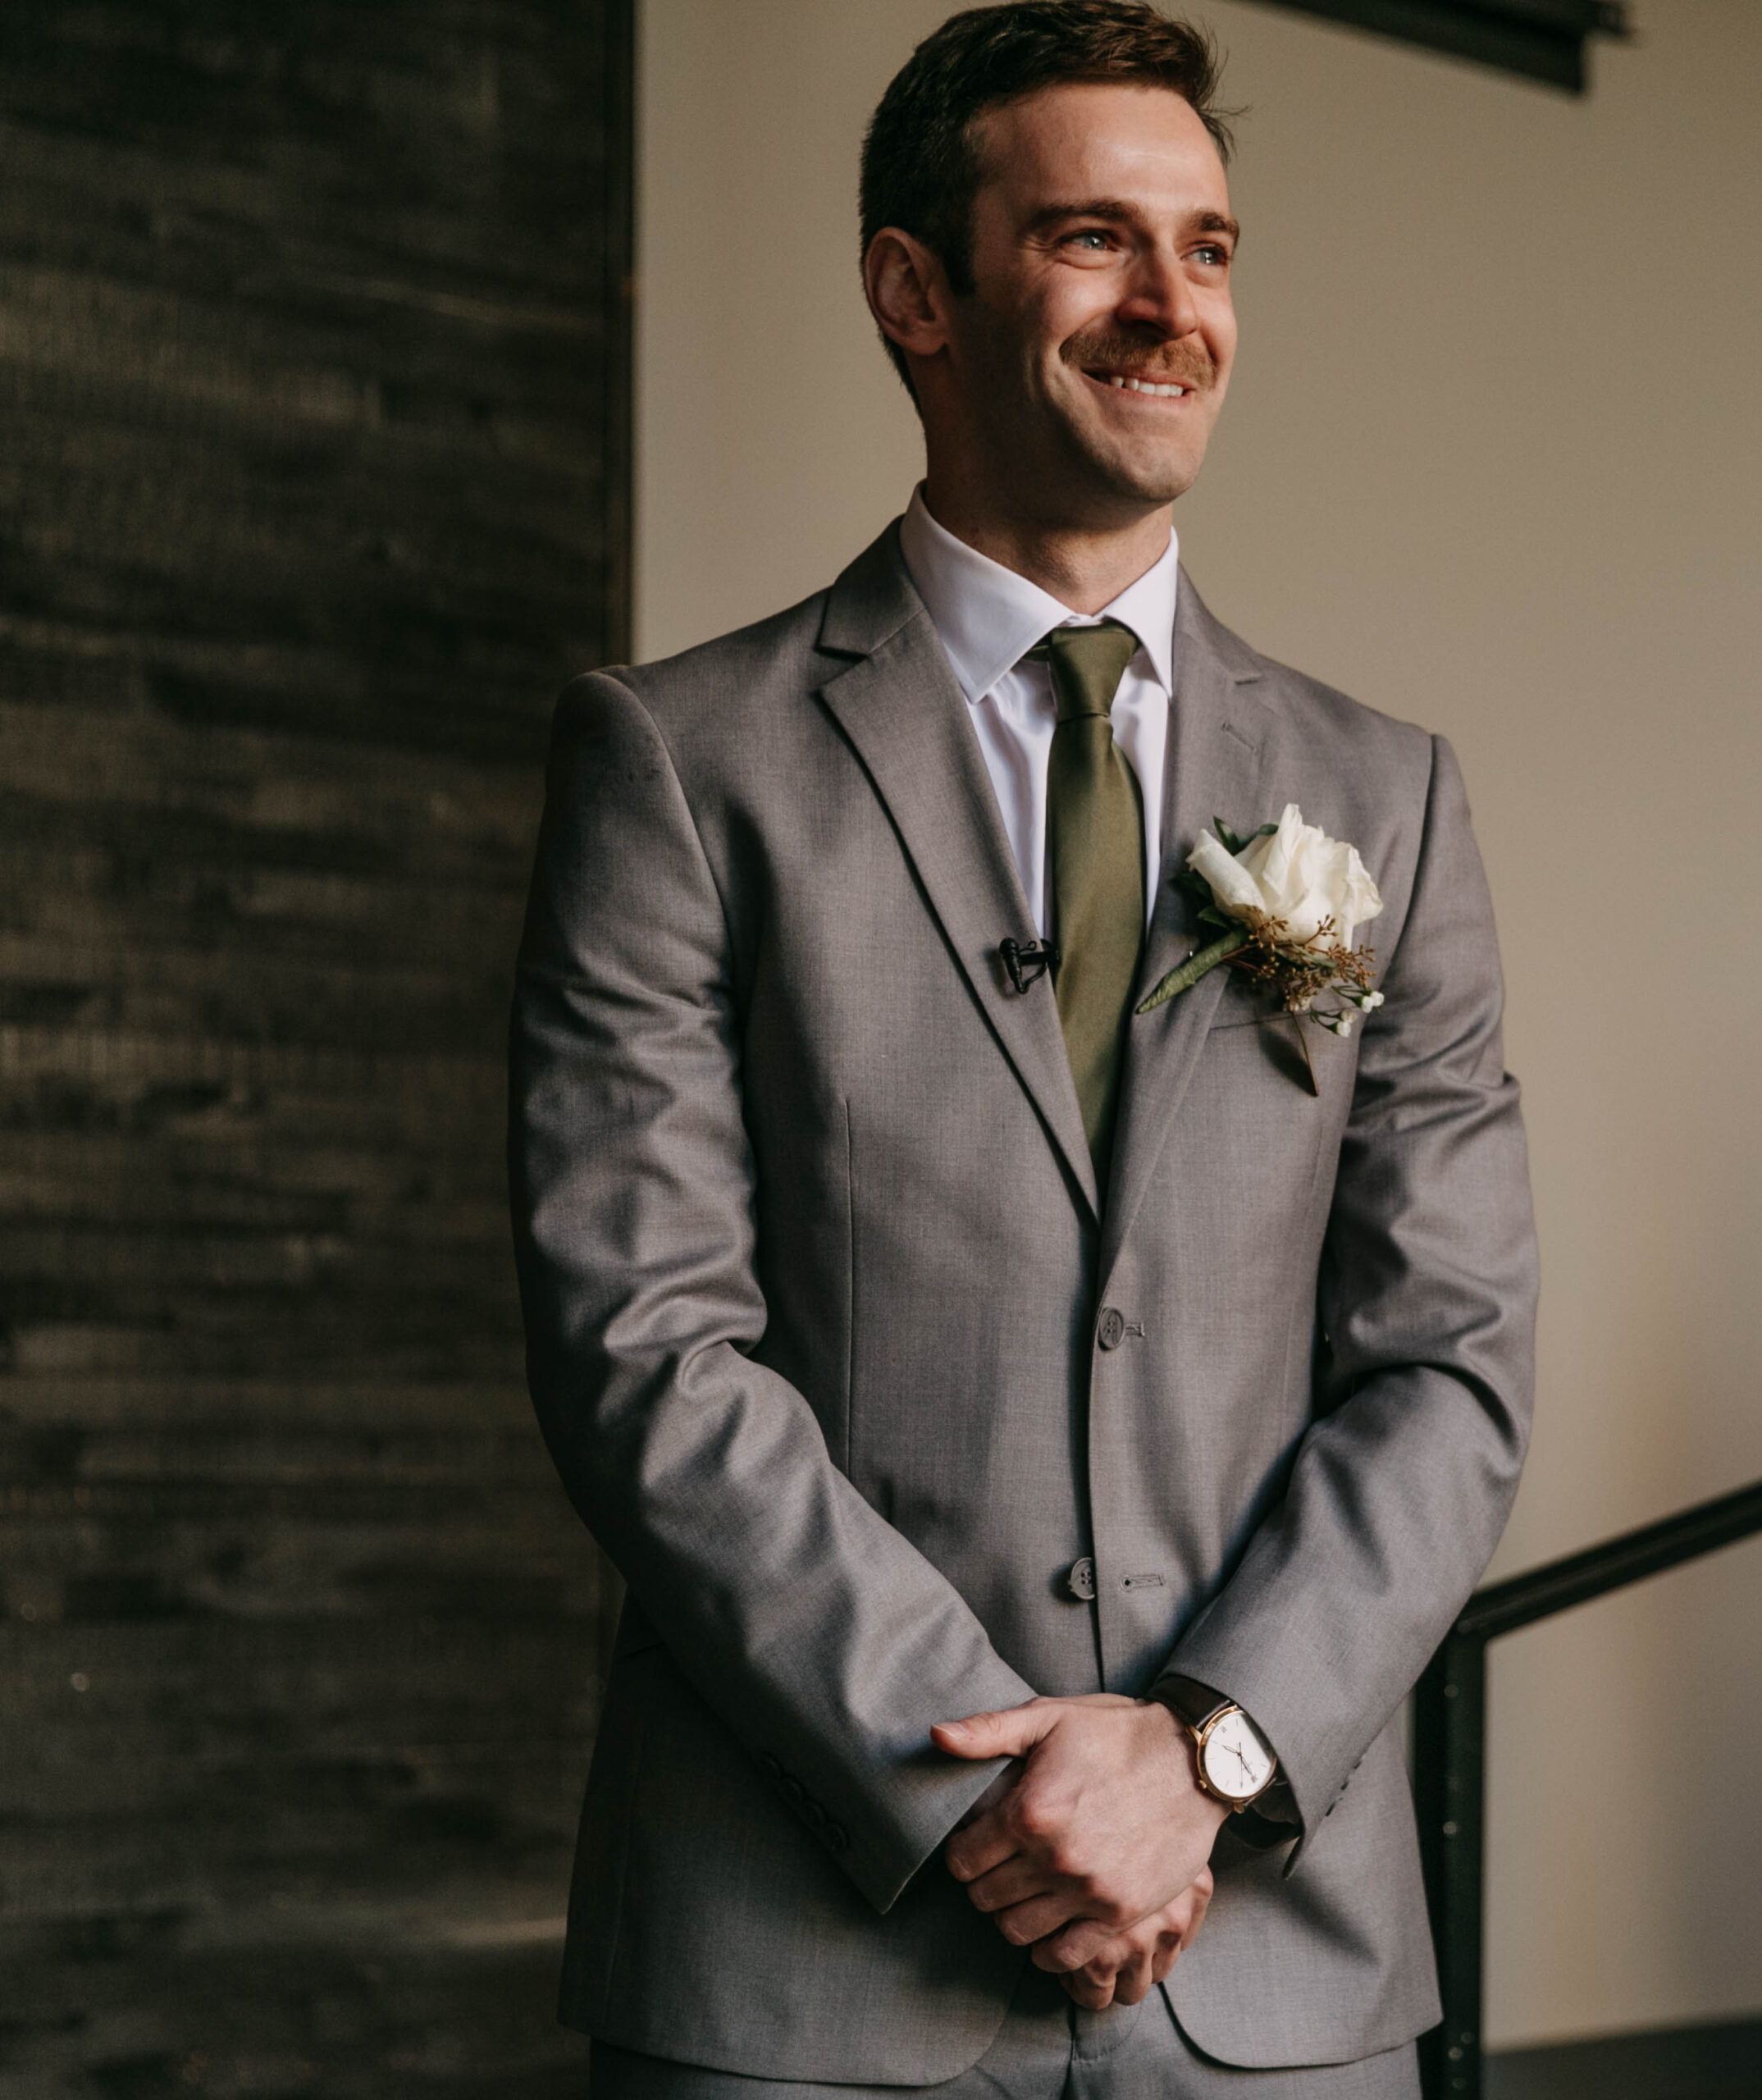 Groom's reaction photograph to bride walking down aisle. Documentary photograph of a wedding ceremony at Hotel covington courtyard.